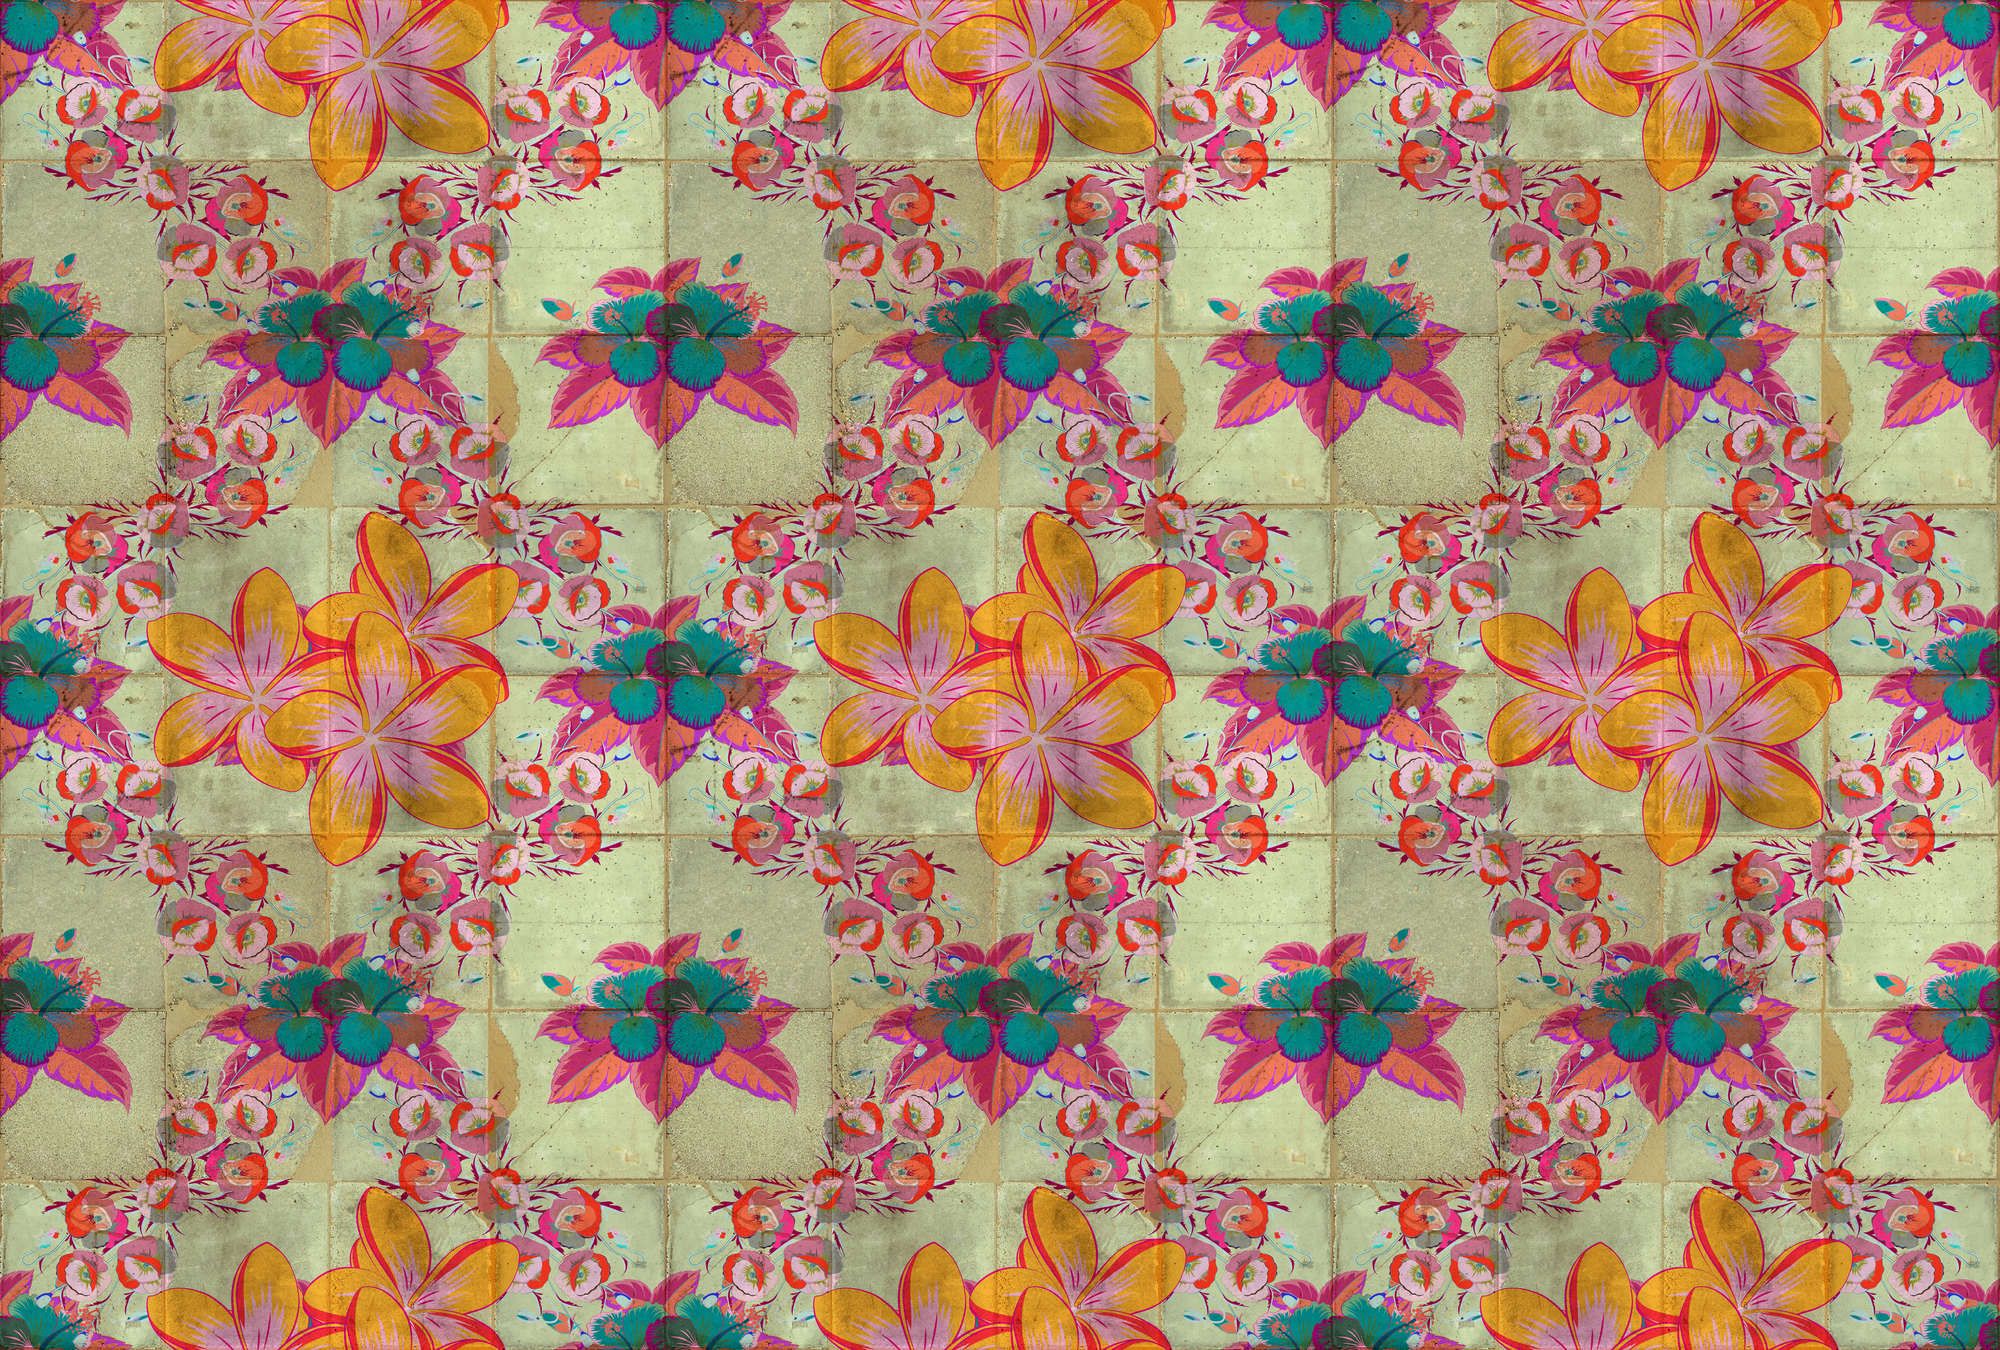             Photo wallpaper »jolie« - Floral design with kaleidoscope effect on concrete tile structure - Lightly textured non-woven fabric
        